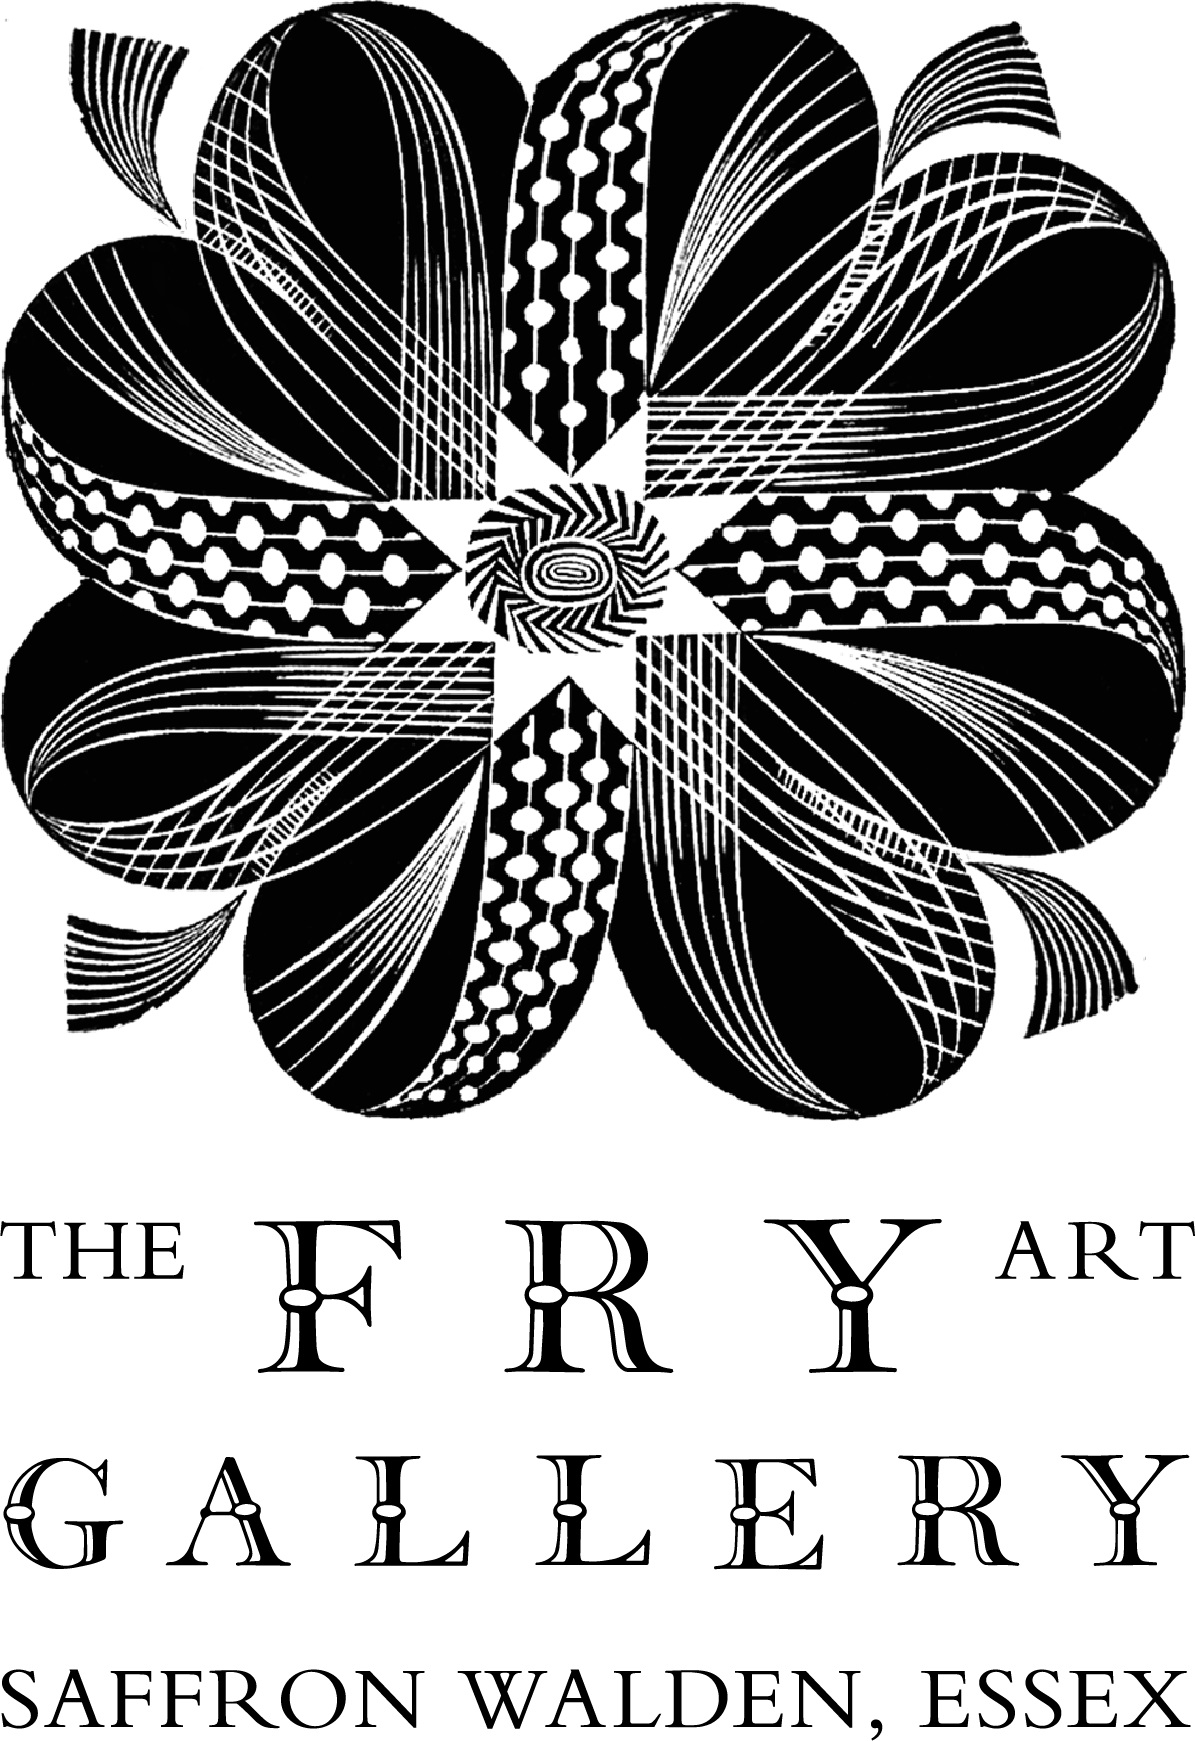 The Fry Art Gallery